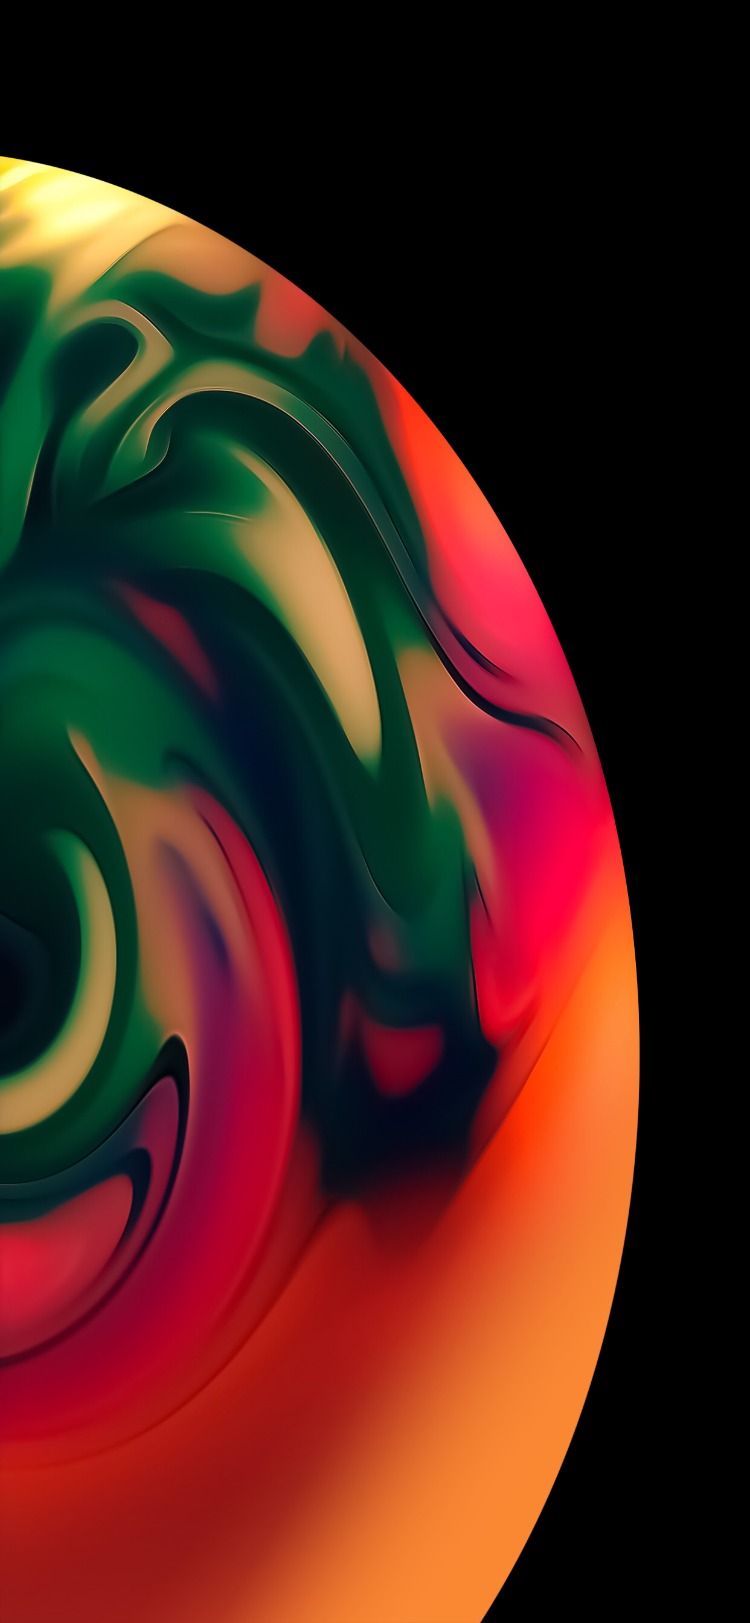 Abstract Wallpaper For iPhone Android Colorful